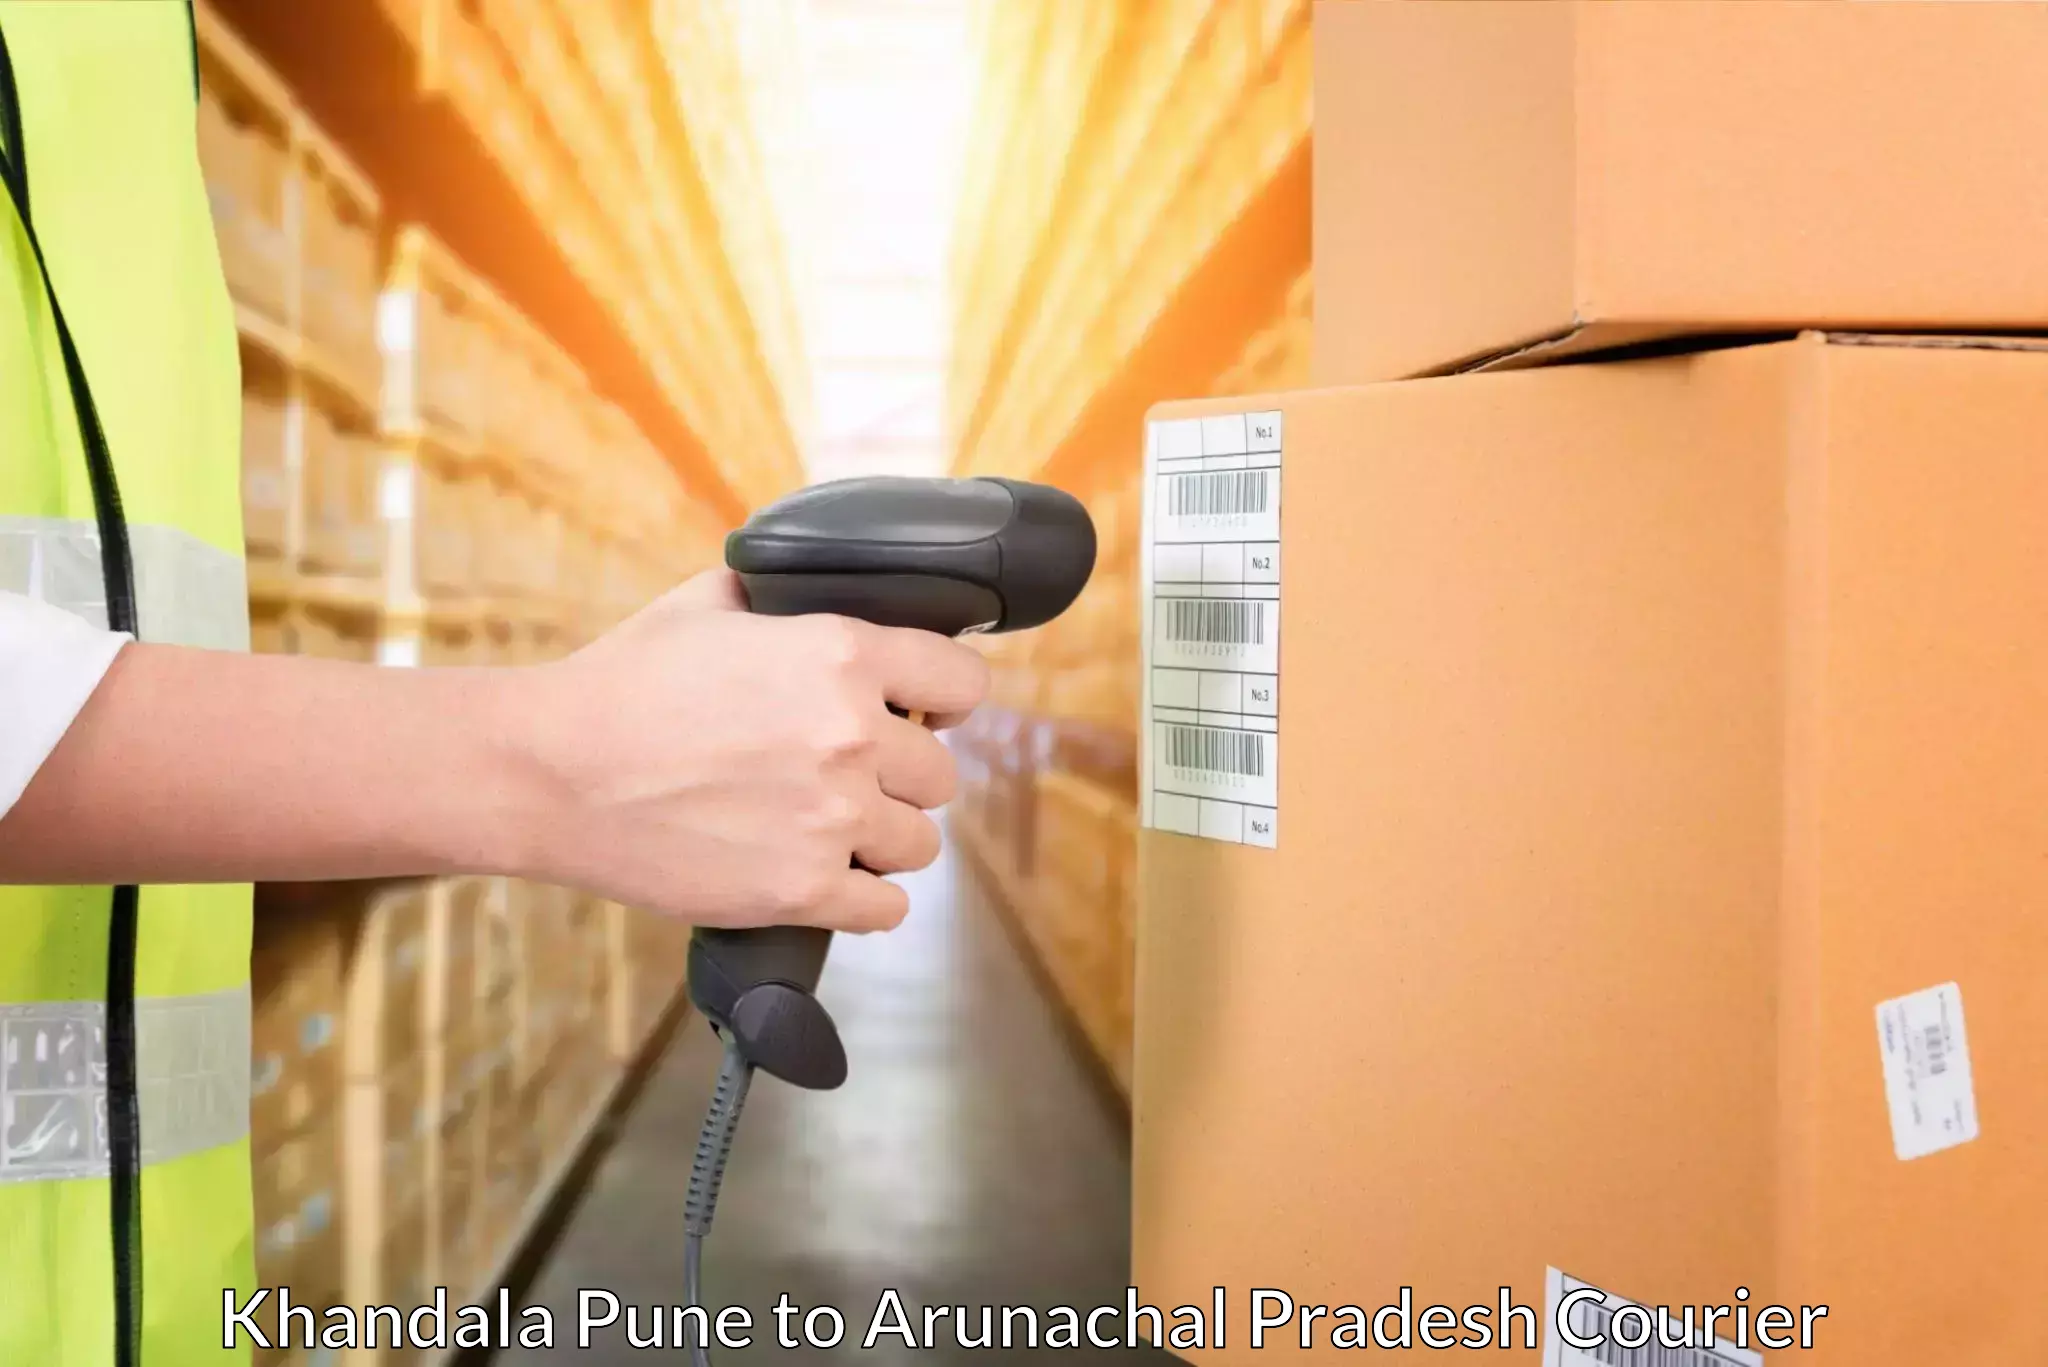 Courier service partnerships in Khandala Pune to Lohit